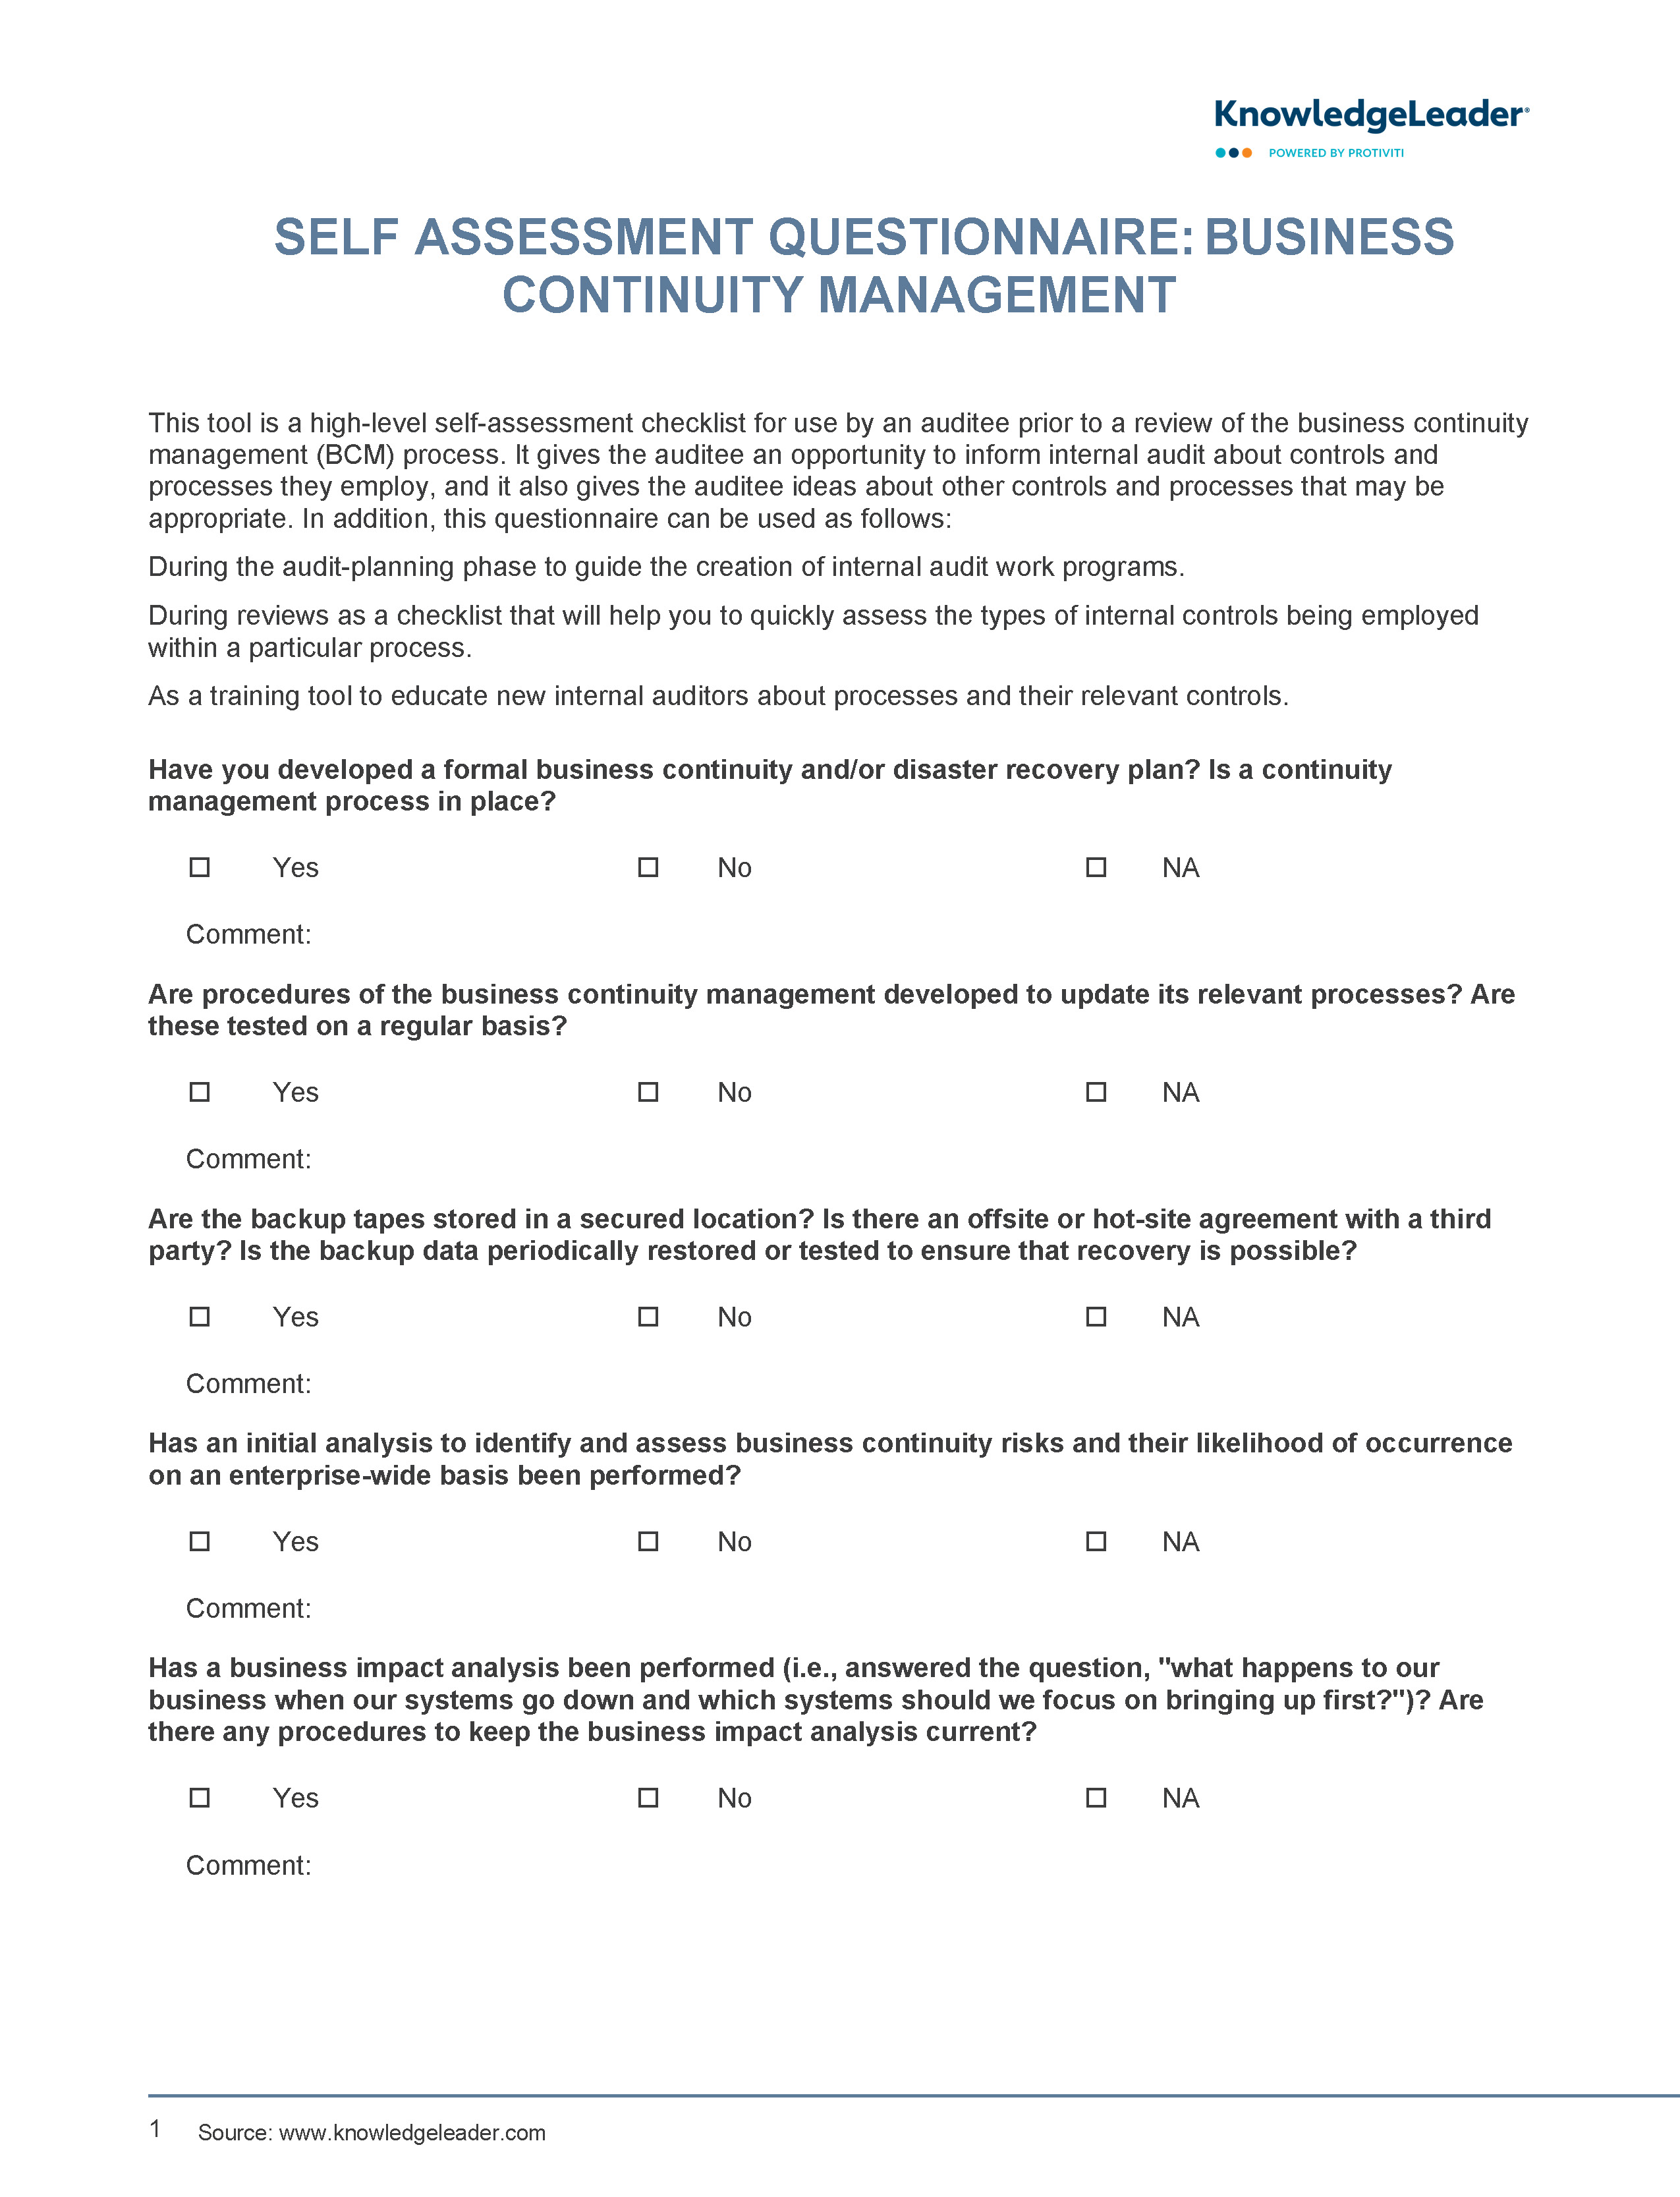 Screenshot of the first page of Business Continuity Compliance Questionnaire